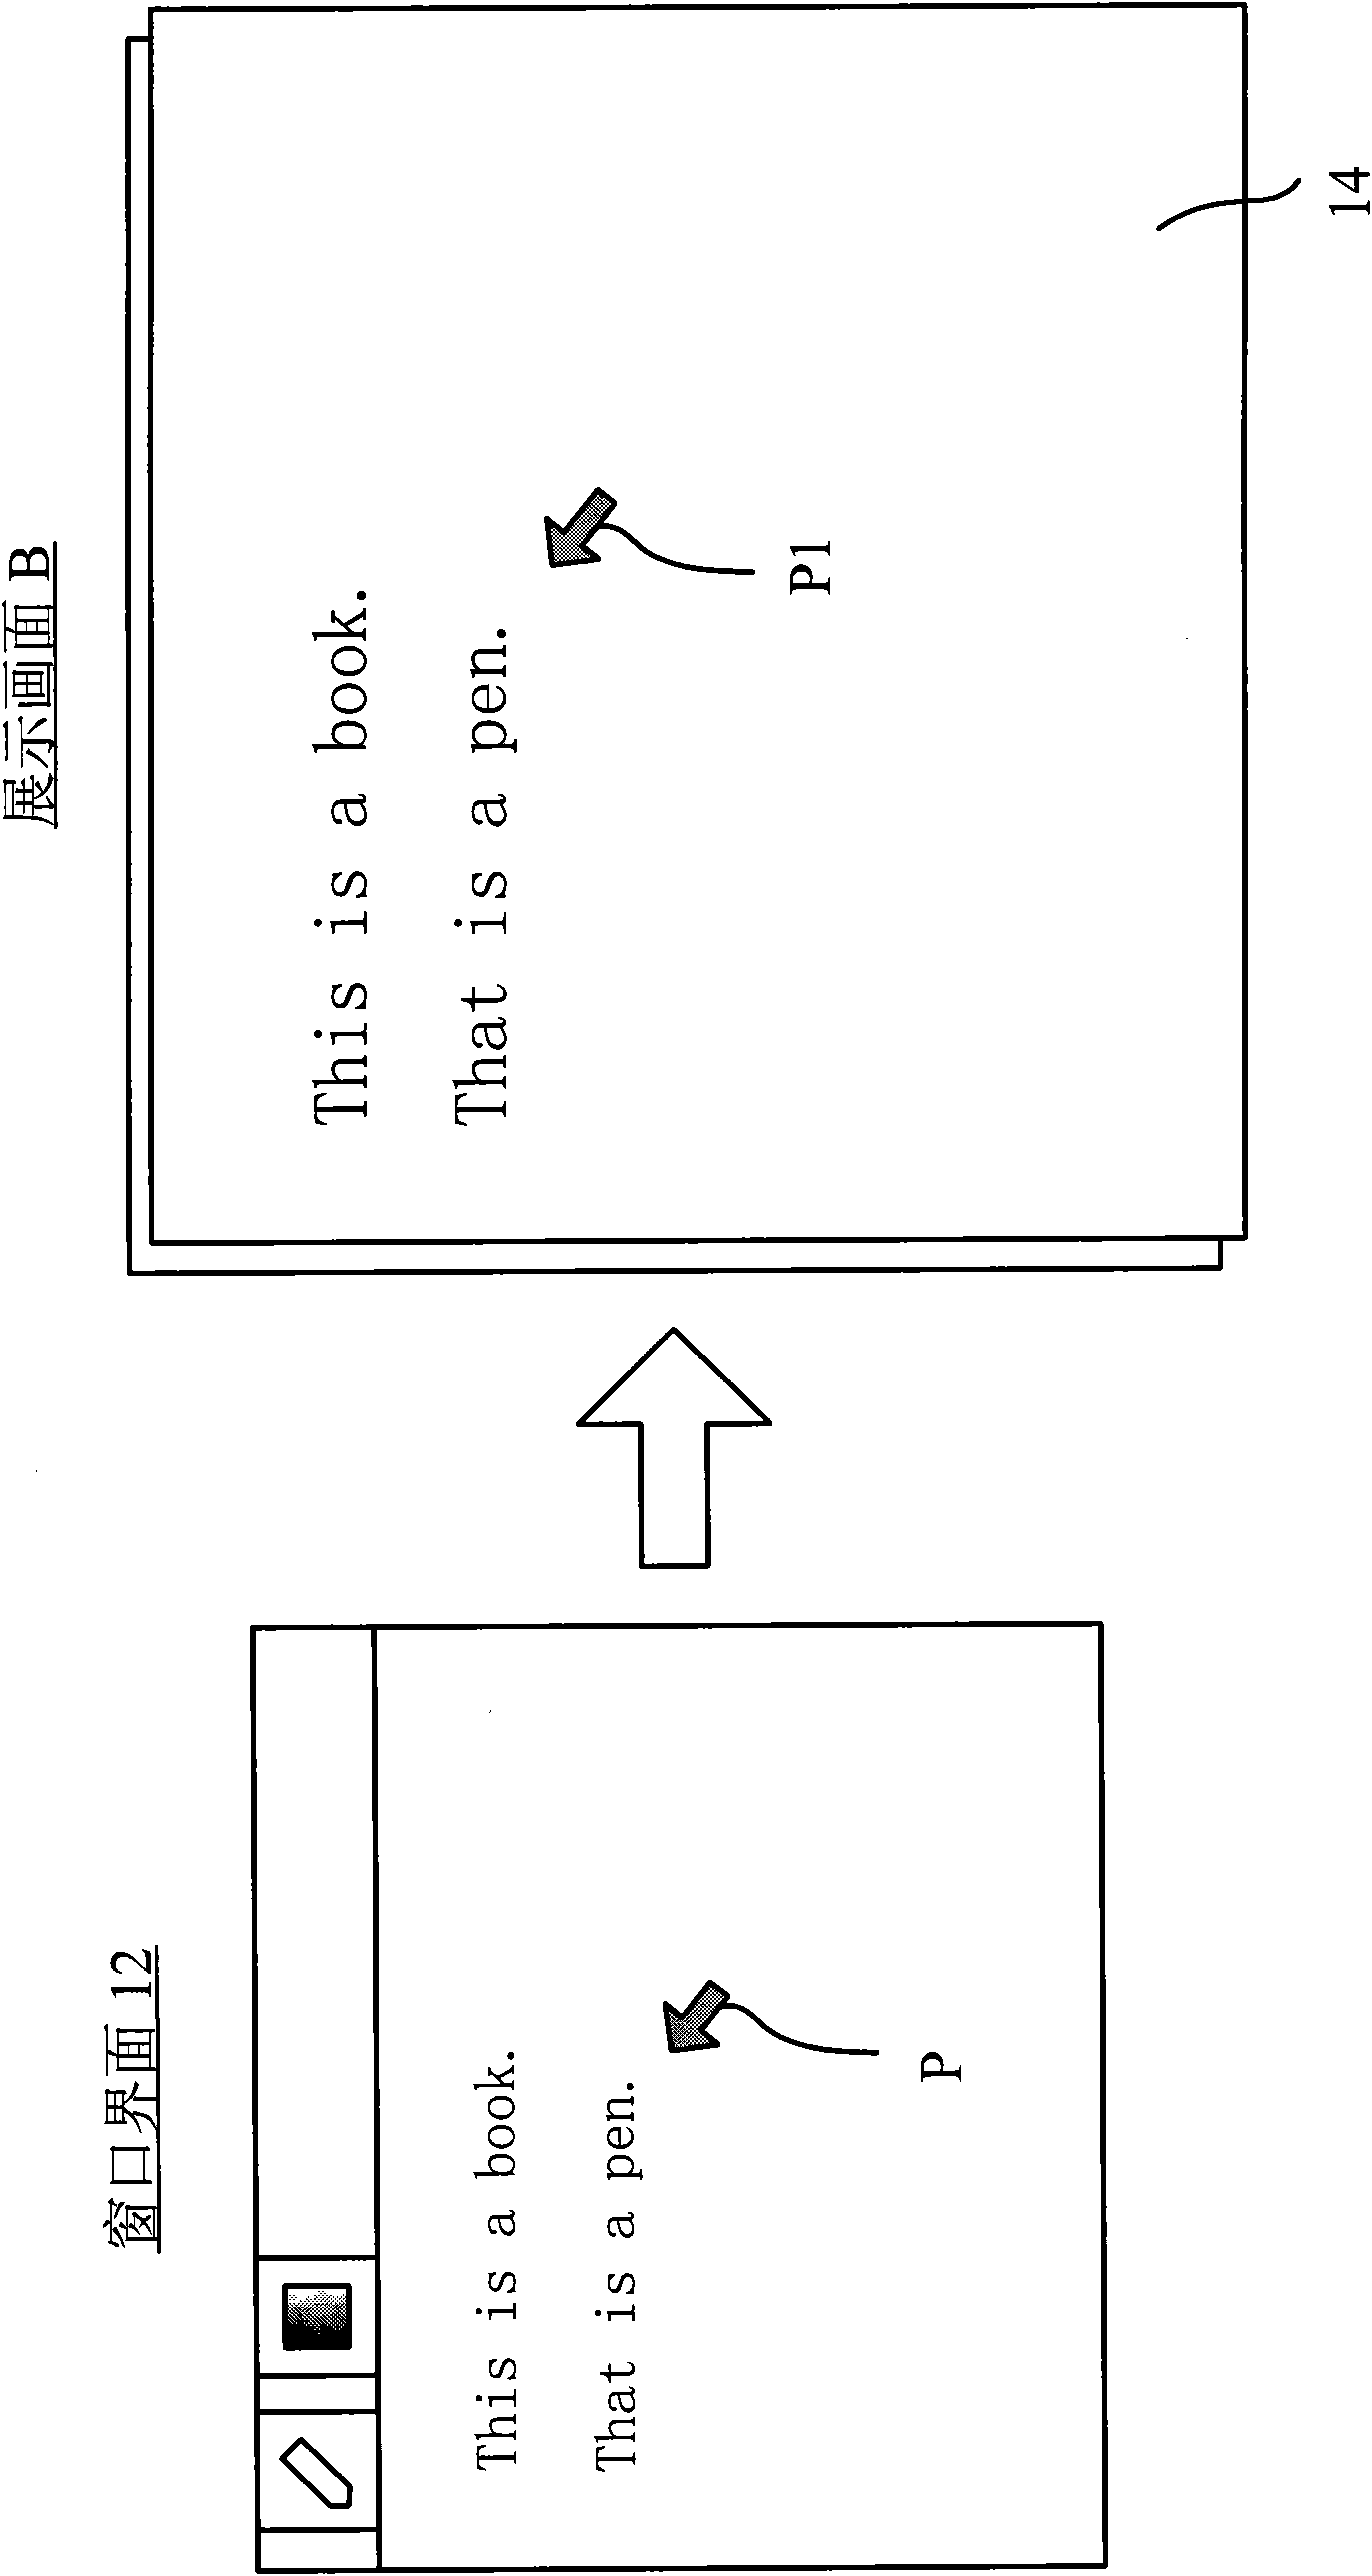 Interactive display system and method